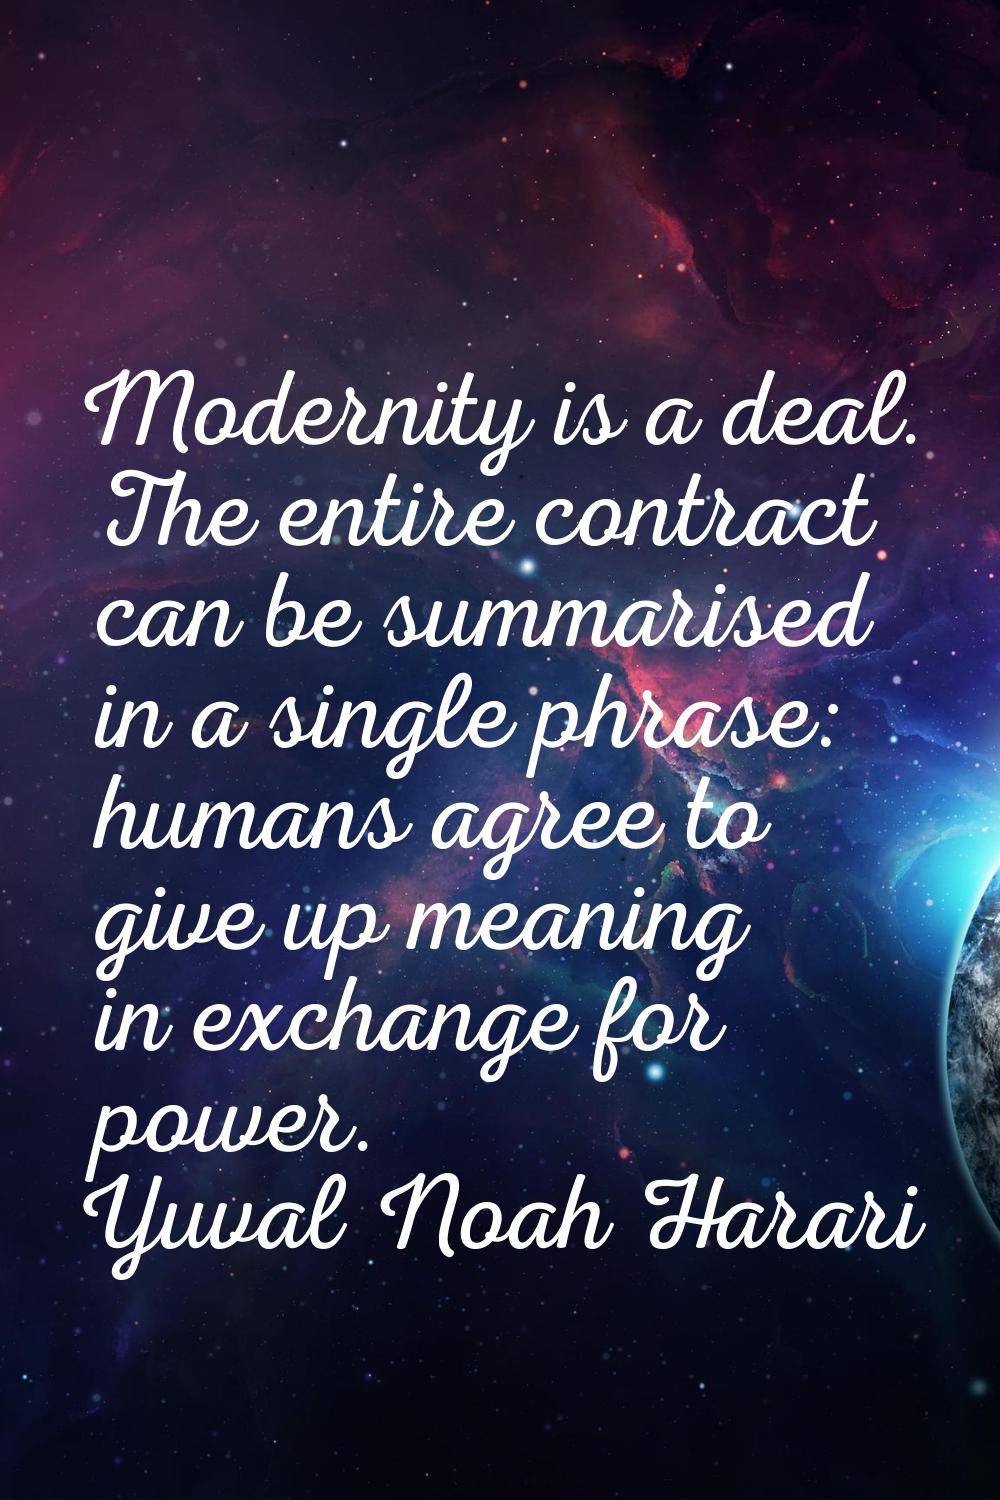 Modernity is a deal. The entire contract can be summarised in a single phrase: humans agree to give